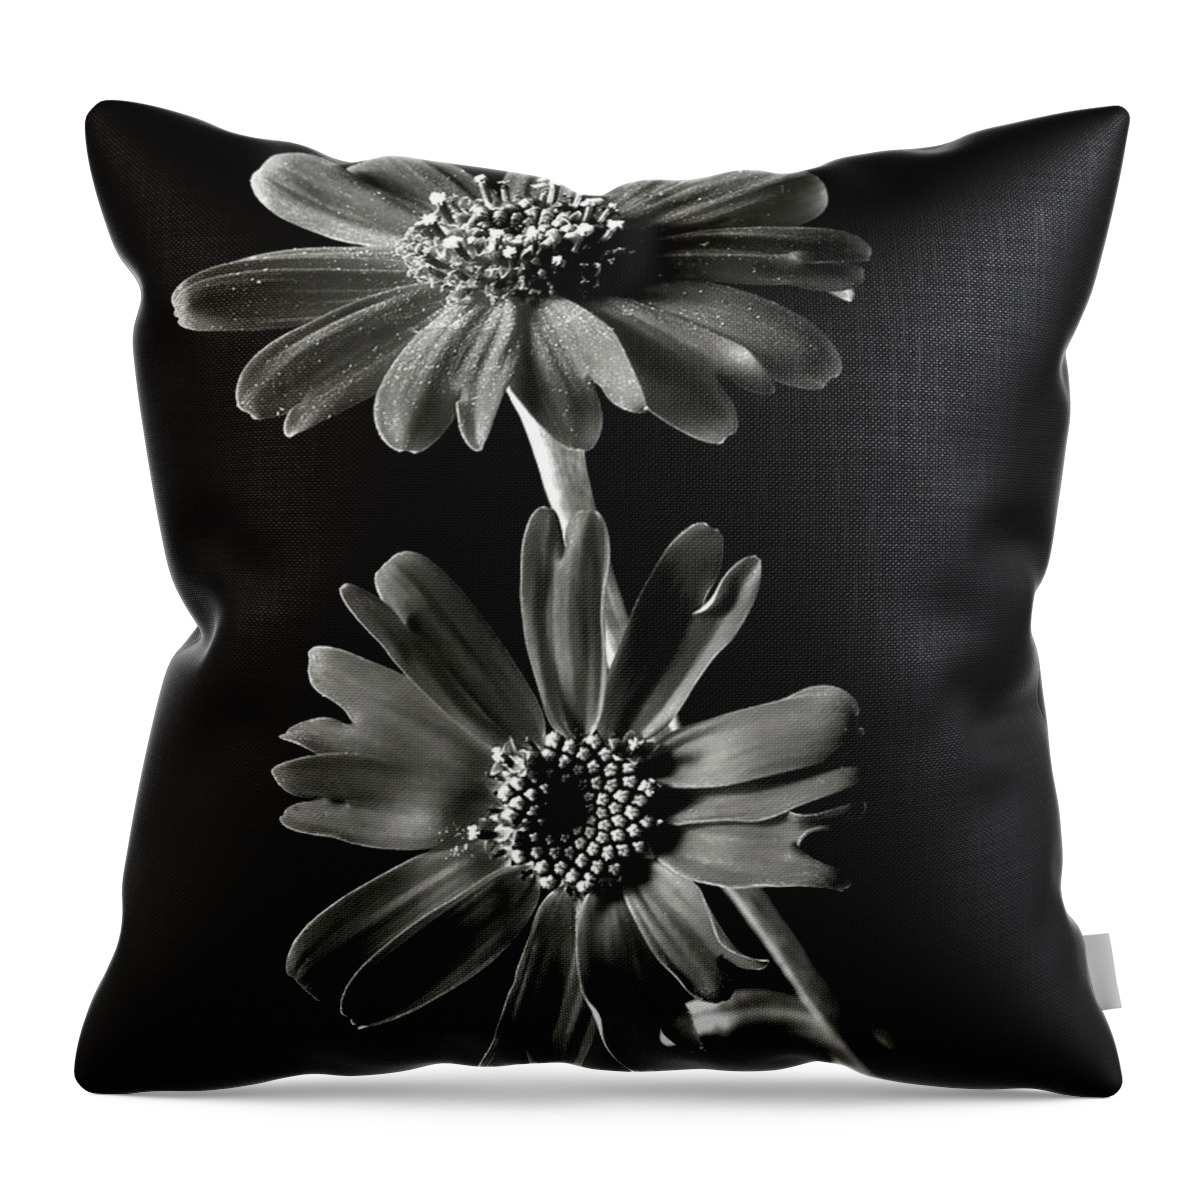 Flower Throw Pillow featuring the photograph Senecio Stellata in Black and White by Endre Balogh